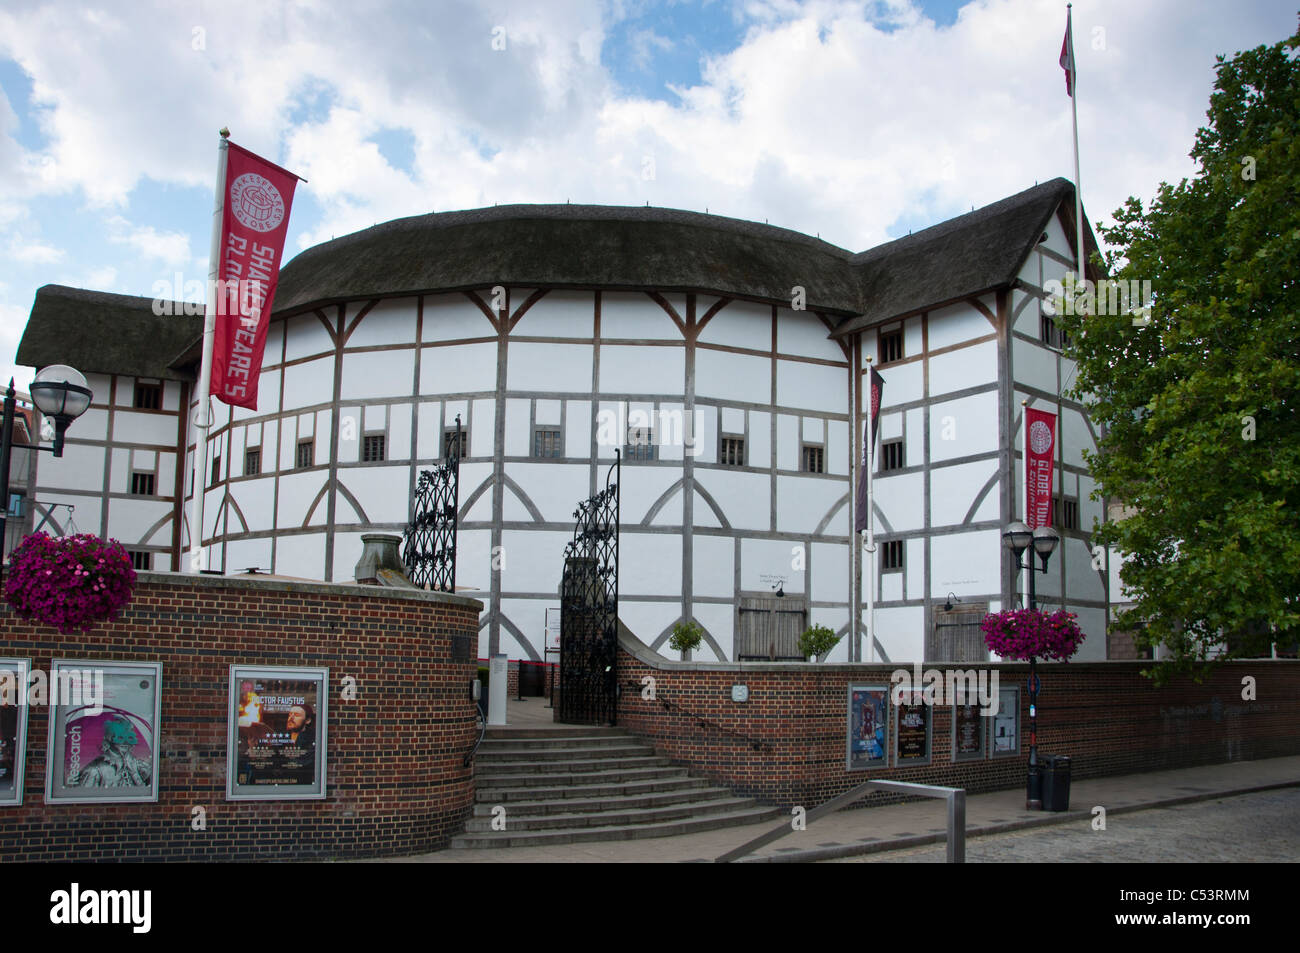 Shakespeare's Globe Theatre, London South Bank. UK Banque D'Images